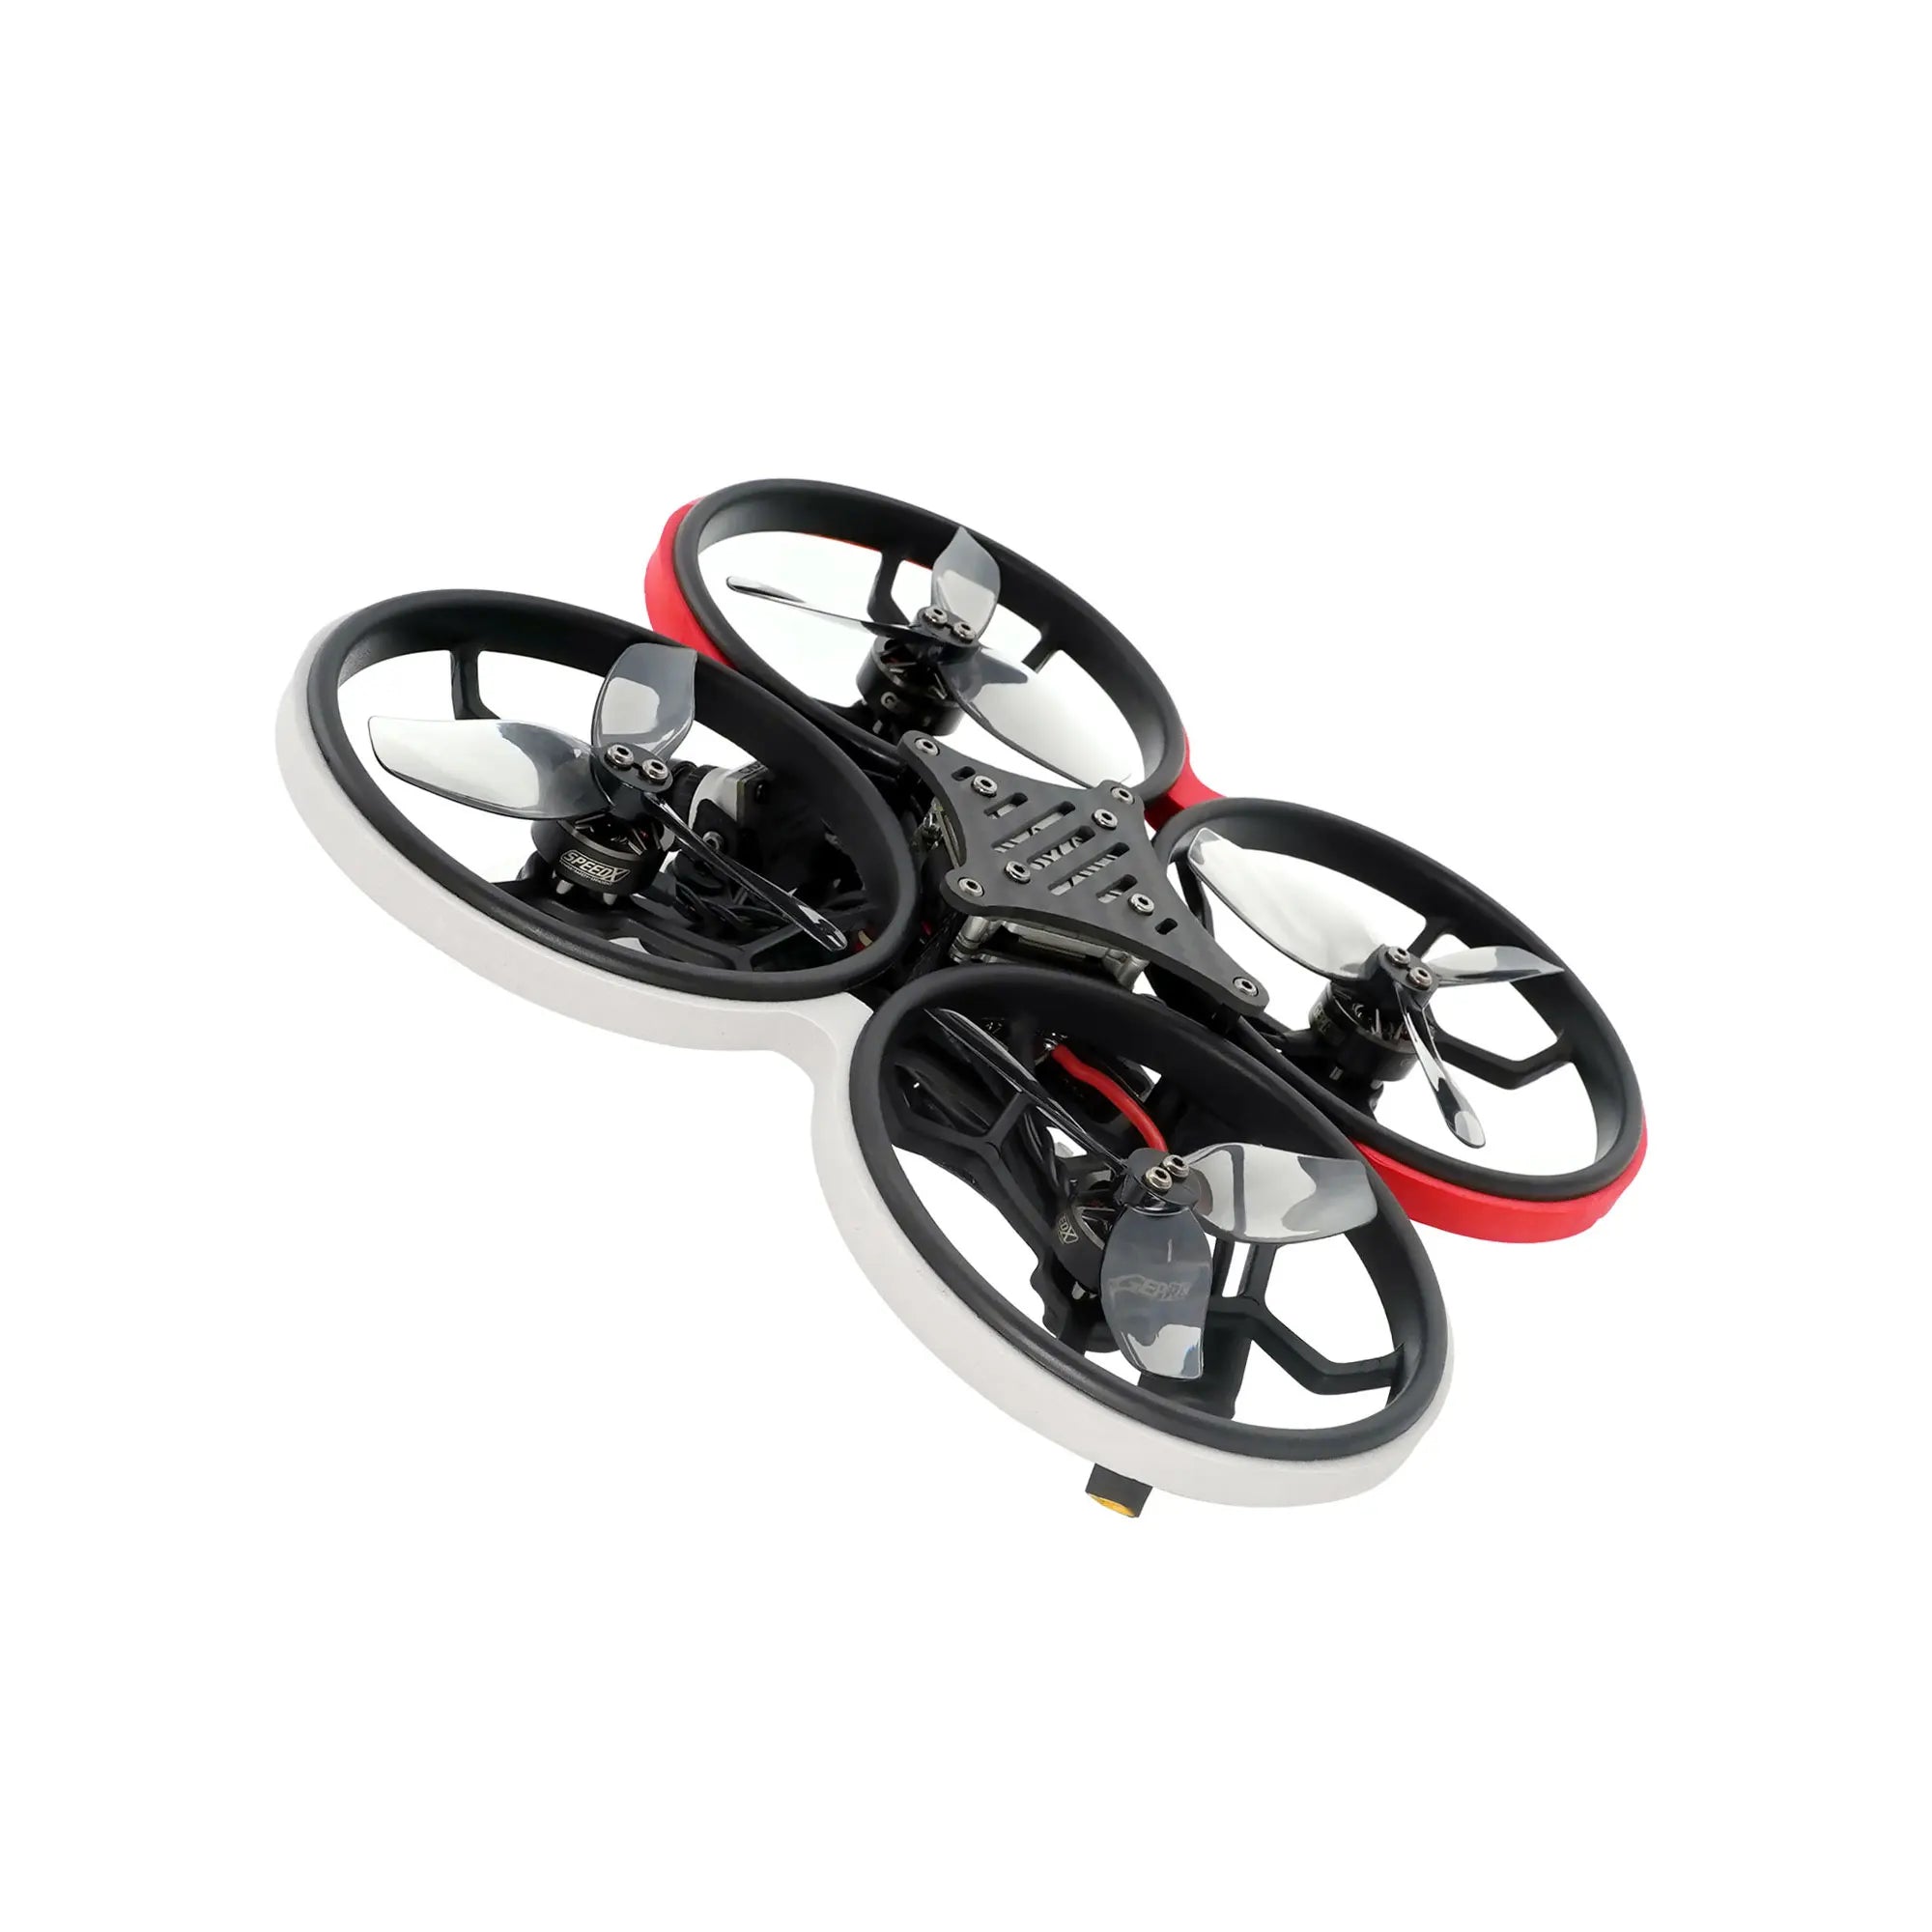 GEPRC CineLog30 HD FPV, the model aircraft model has a certain risk,please be sure to operate in a safe